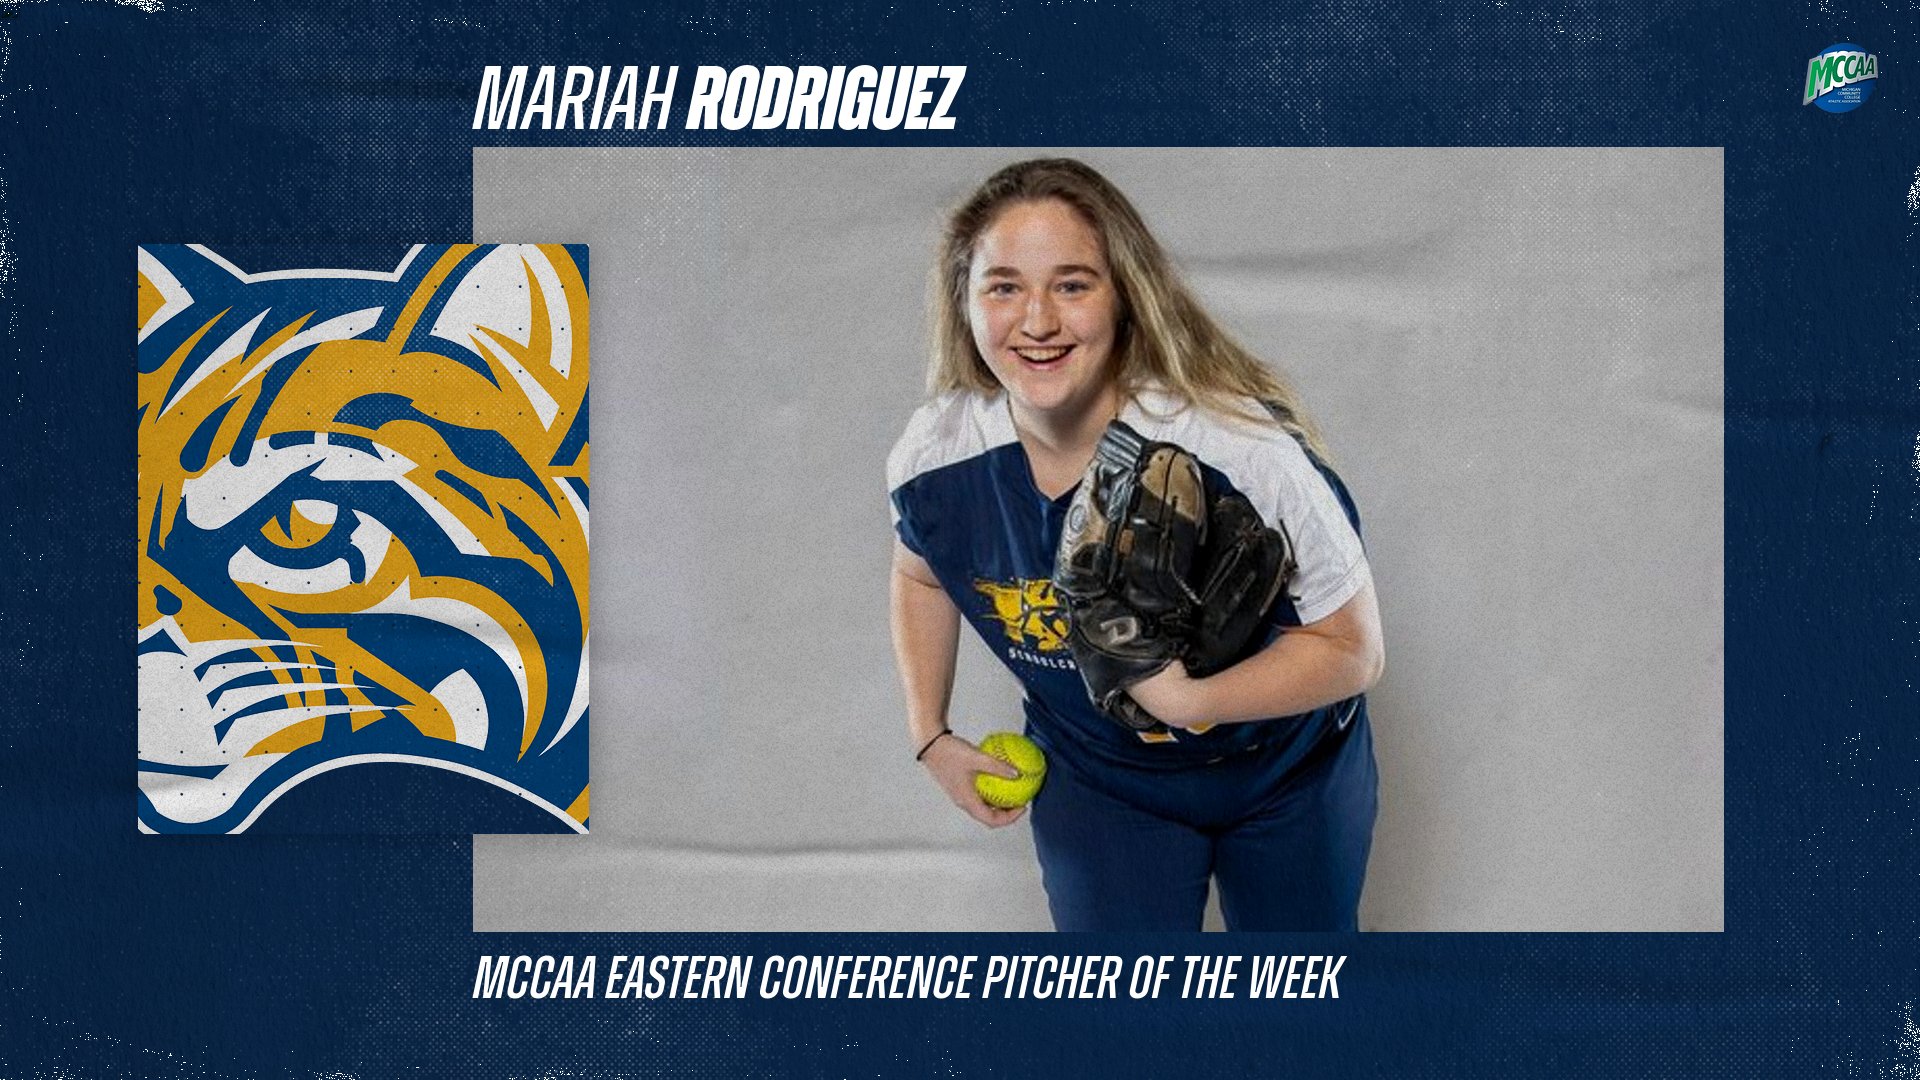 Mariah Rodriguez Named MCCAA Eastern Conference Pitcher of the Week